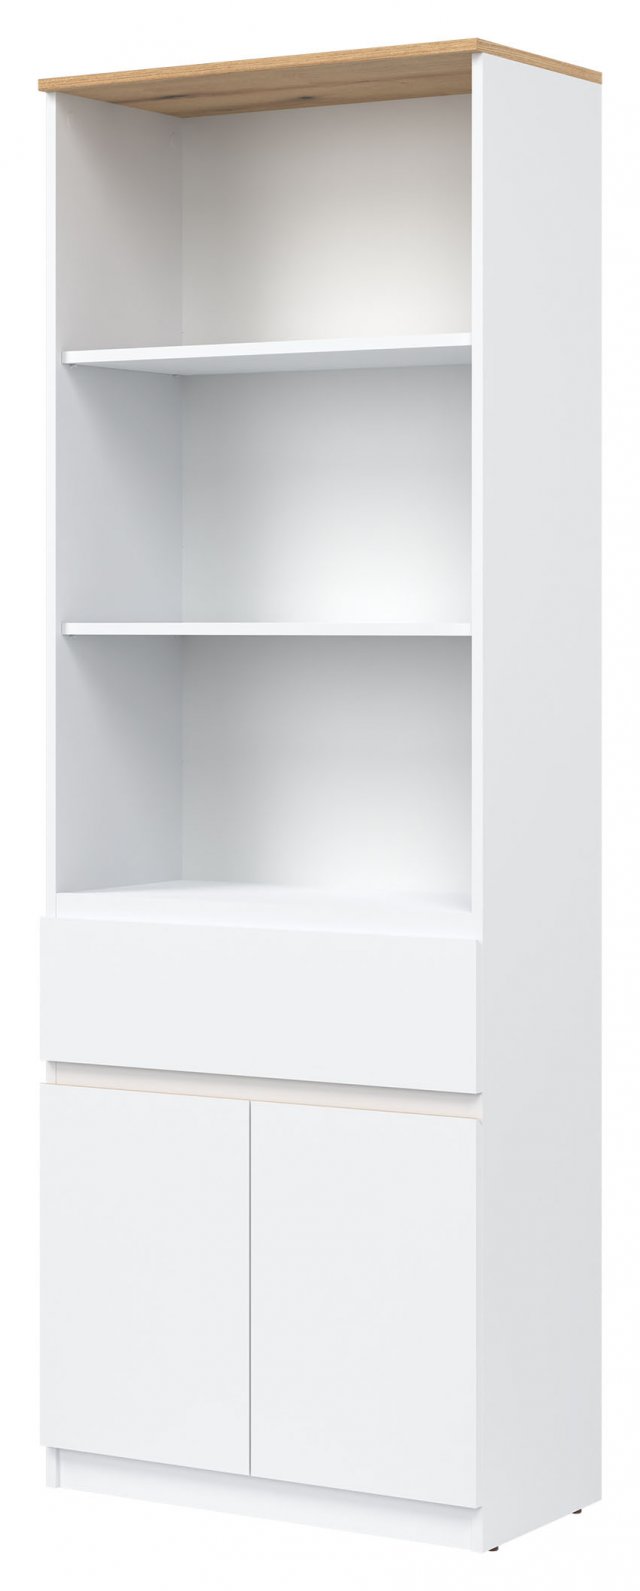 RM- 09 Tall cabinet